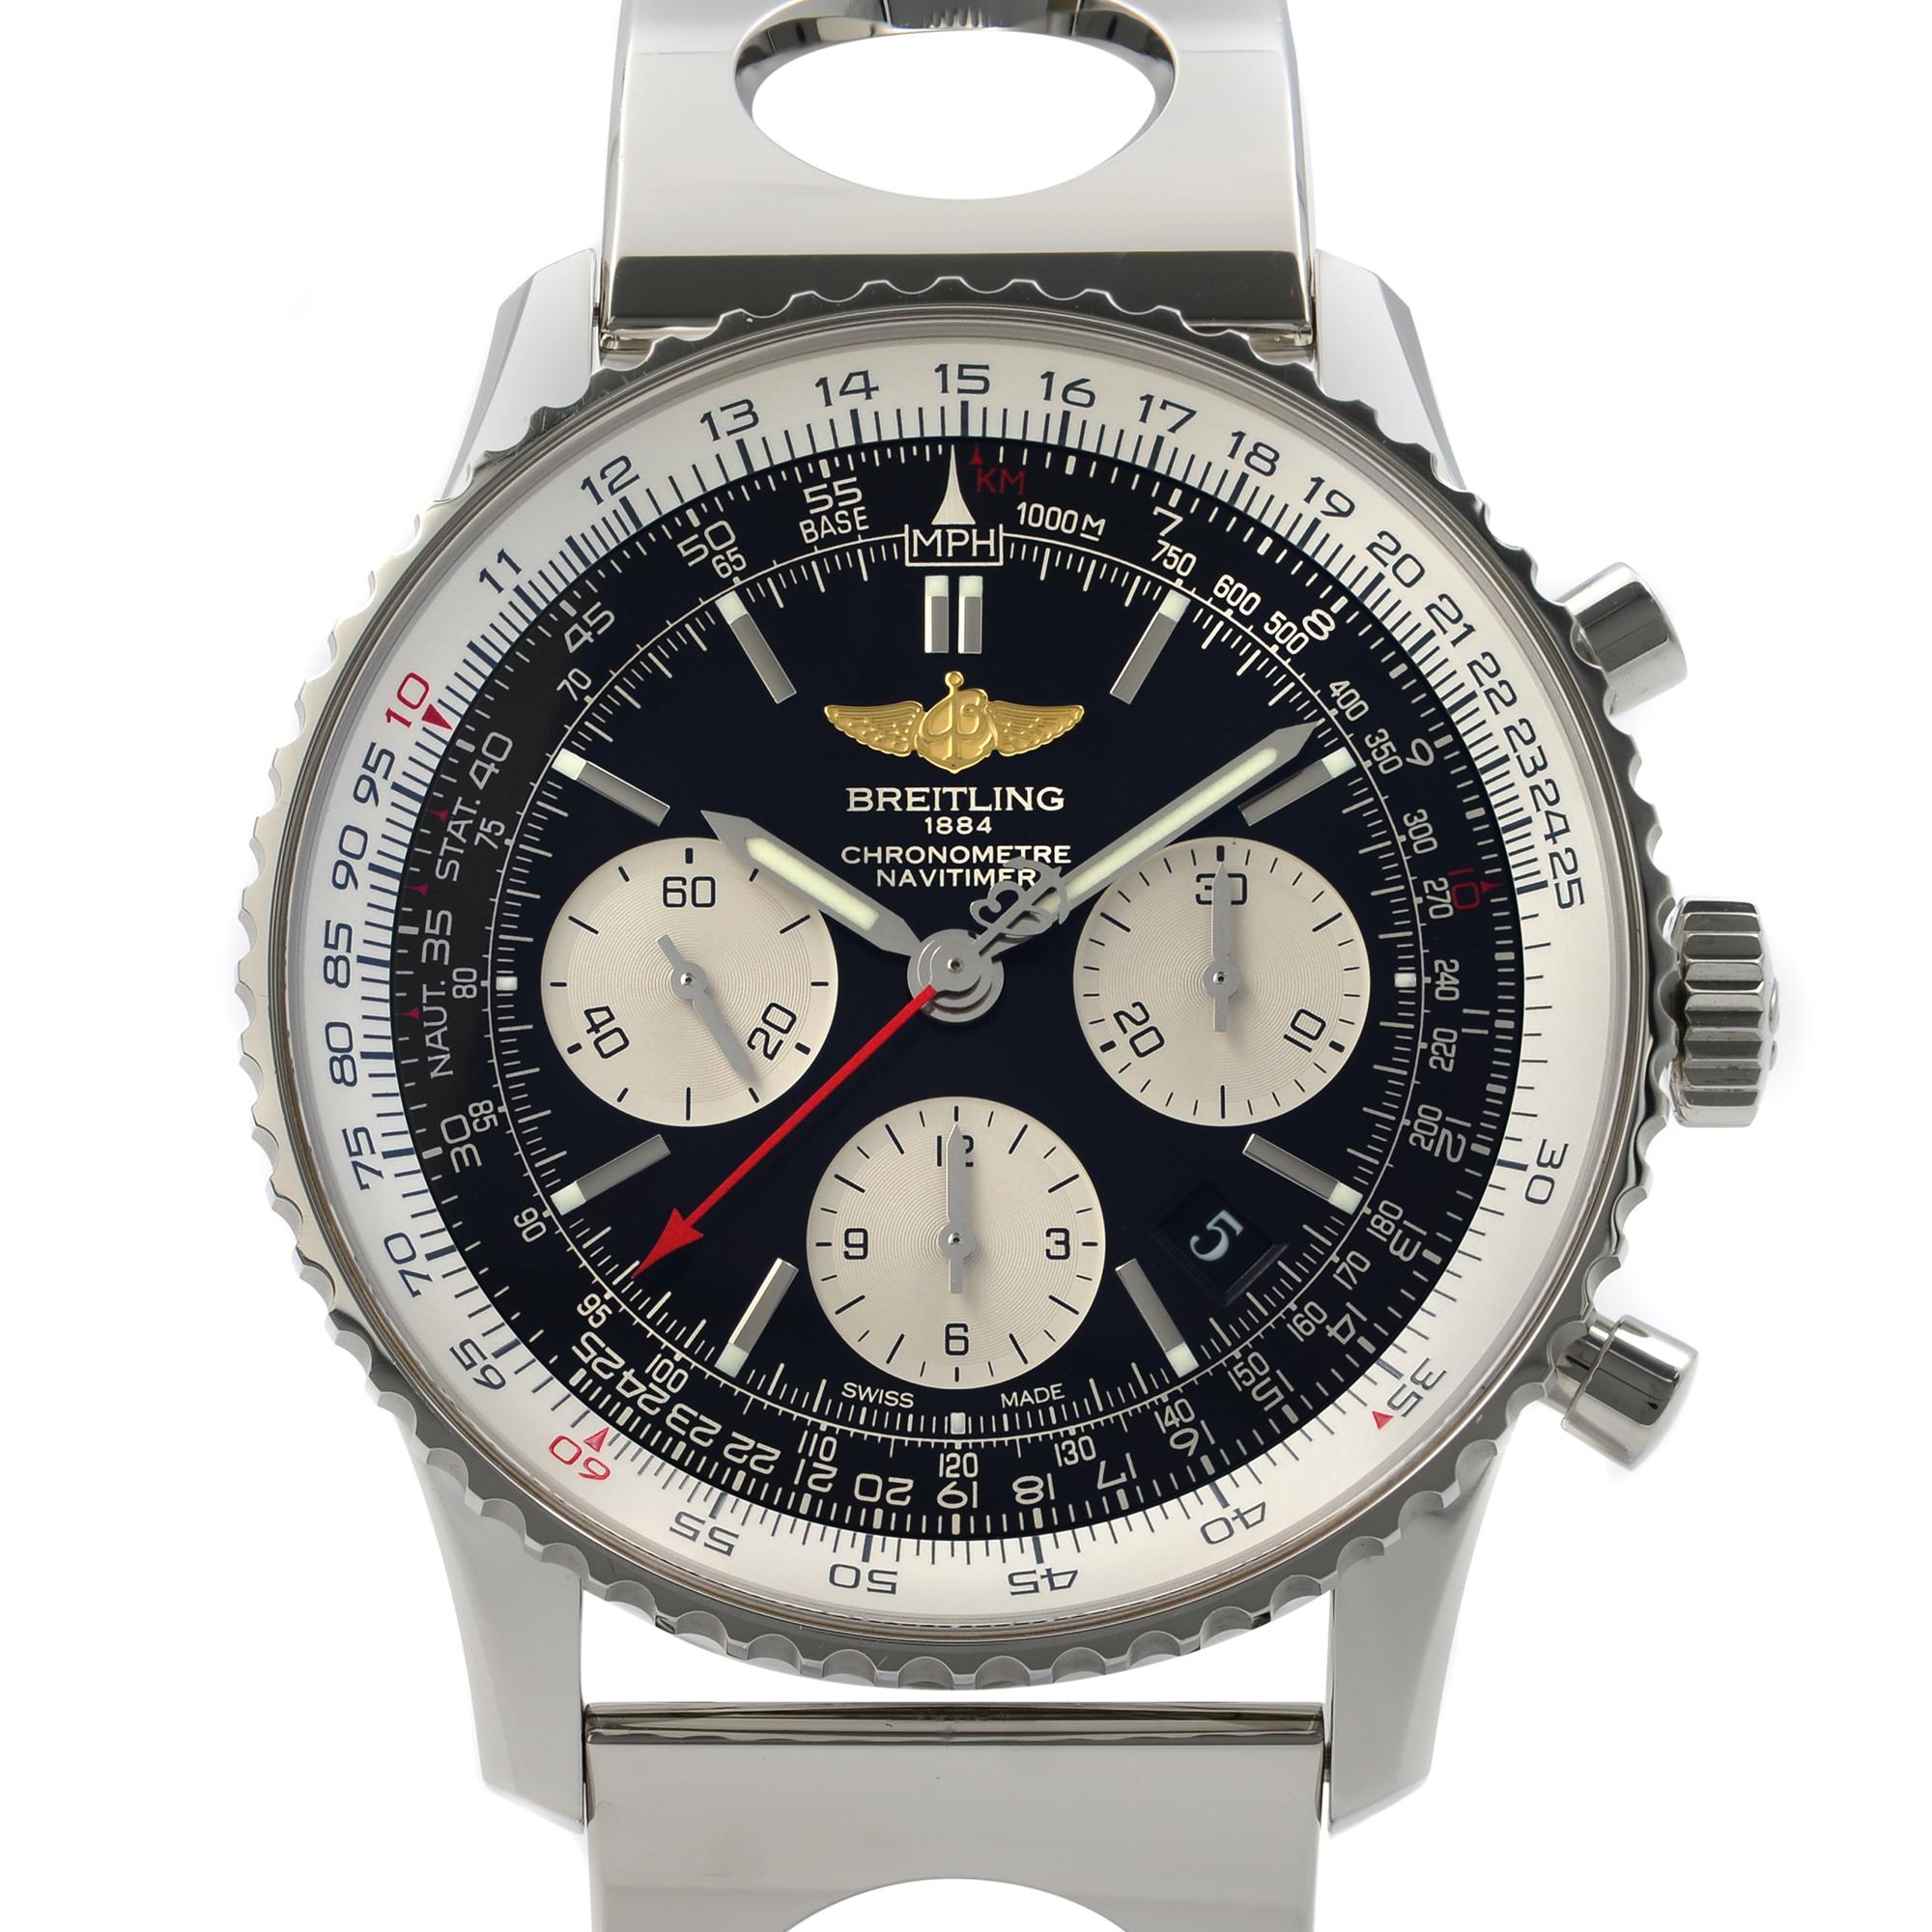 Breitling Navitimer Cosmonaute Bracelet. Super Mint Condition Comes with the manufacturer's box and authenticity certificate. 
Details:
MSRP 9050
Model Number AB012012/BB01-222A
Brand Breitling
Department Men
Style Dress/Formal, Sport
Model